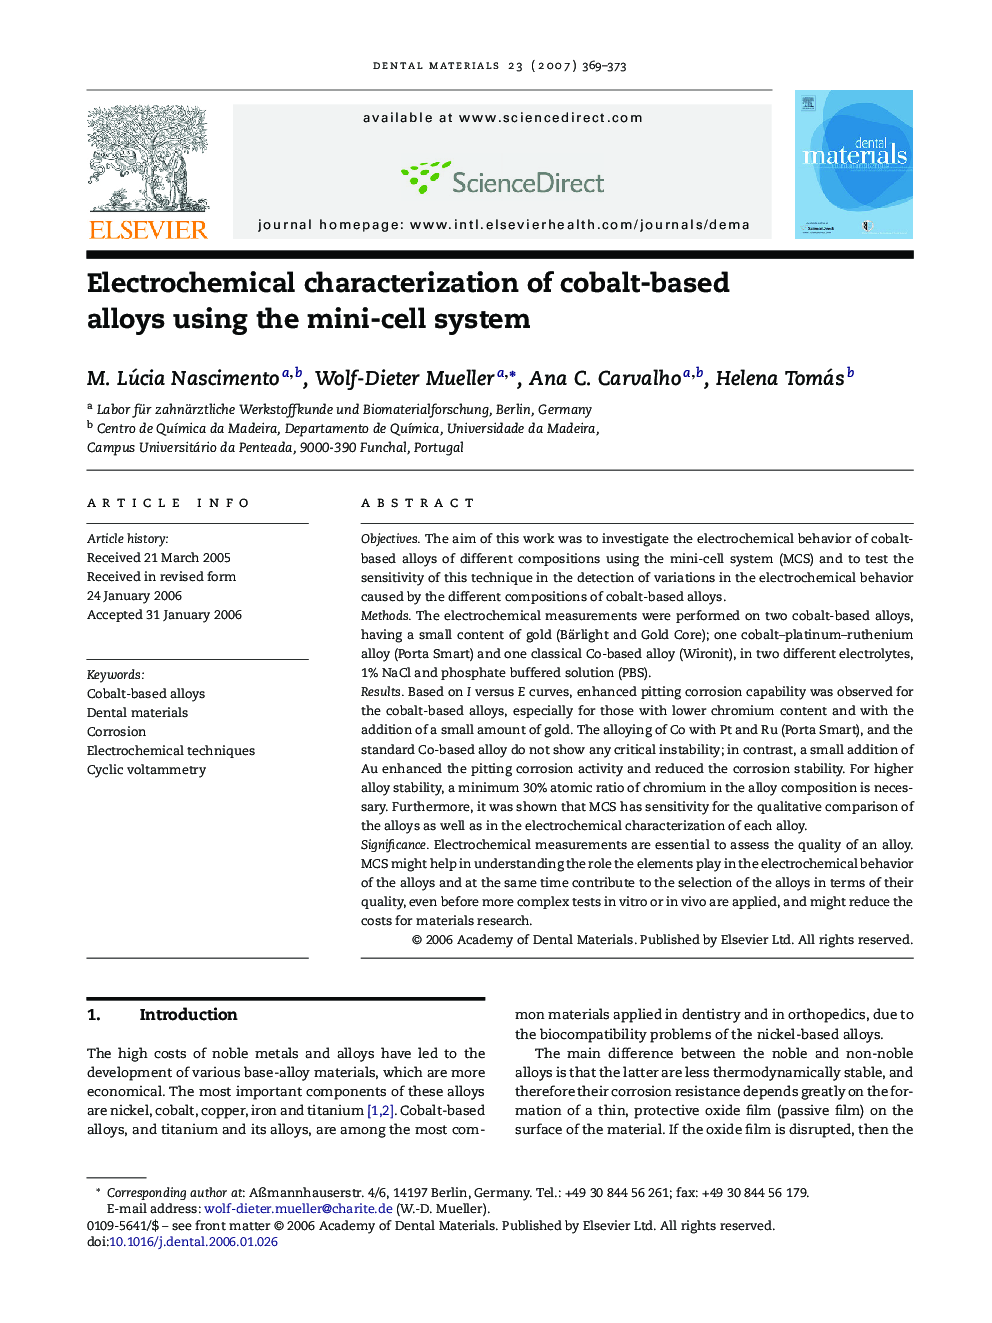 Electrochemical characterization of cobalt-based alloys using the mini-cell system